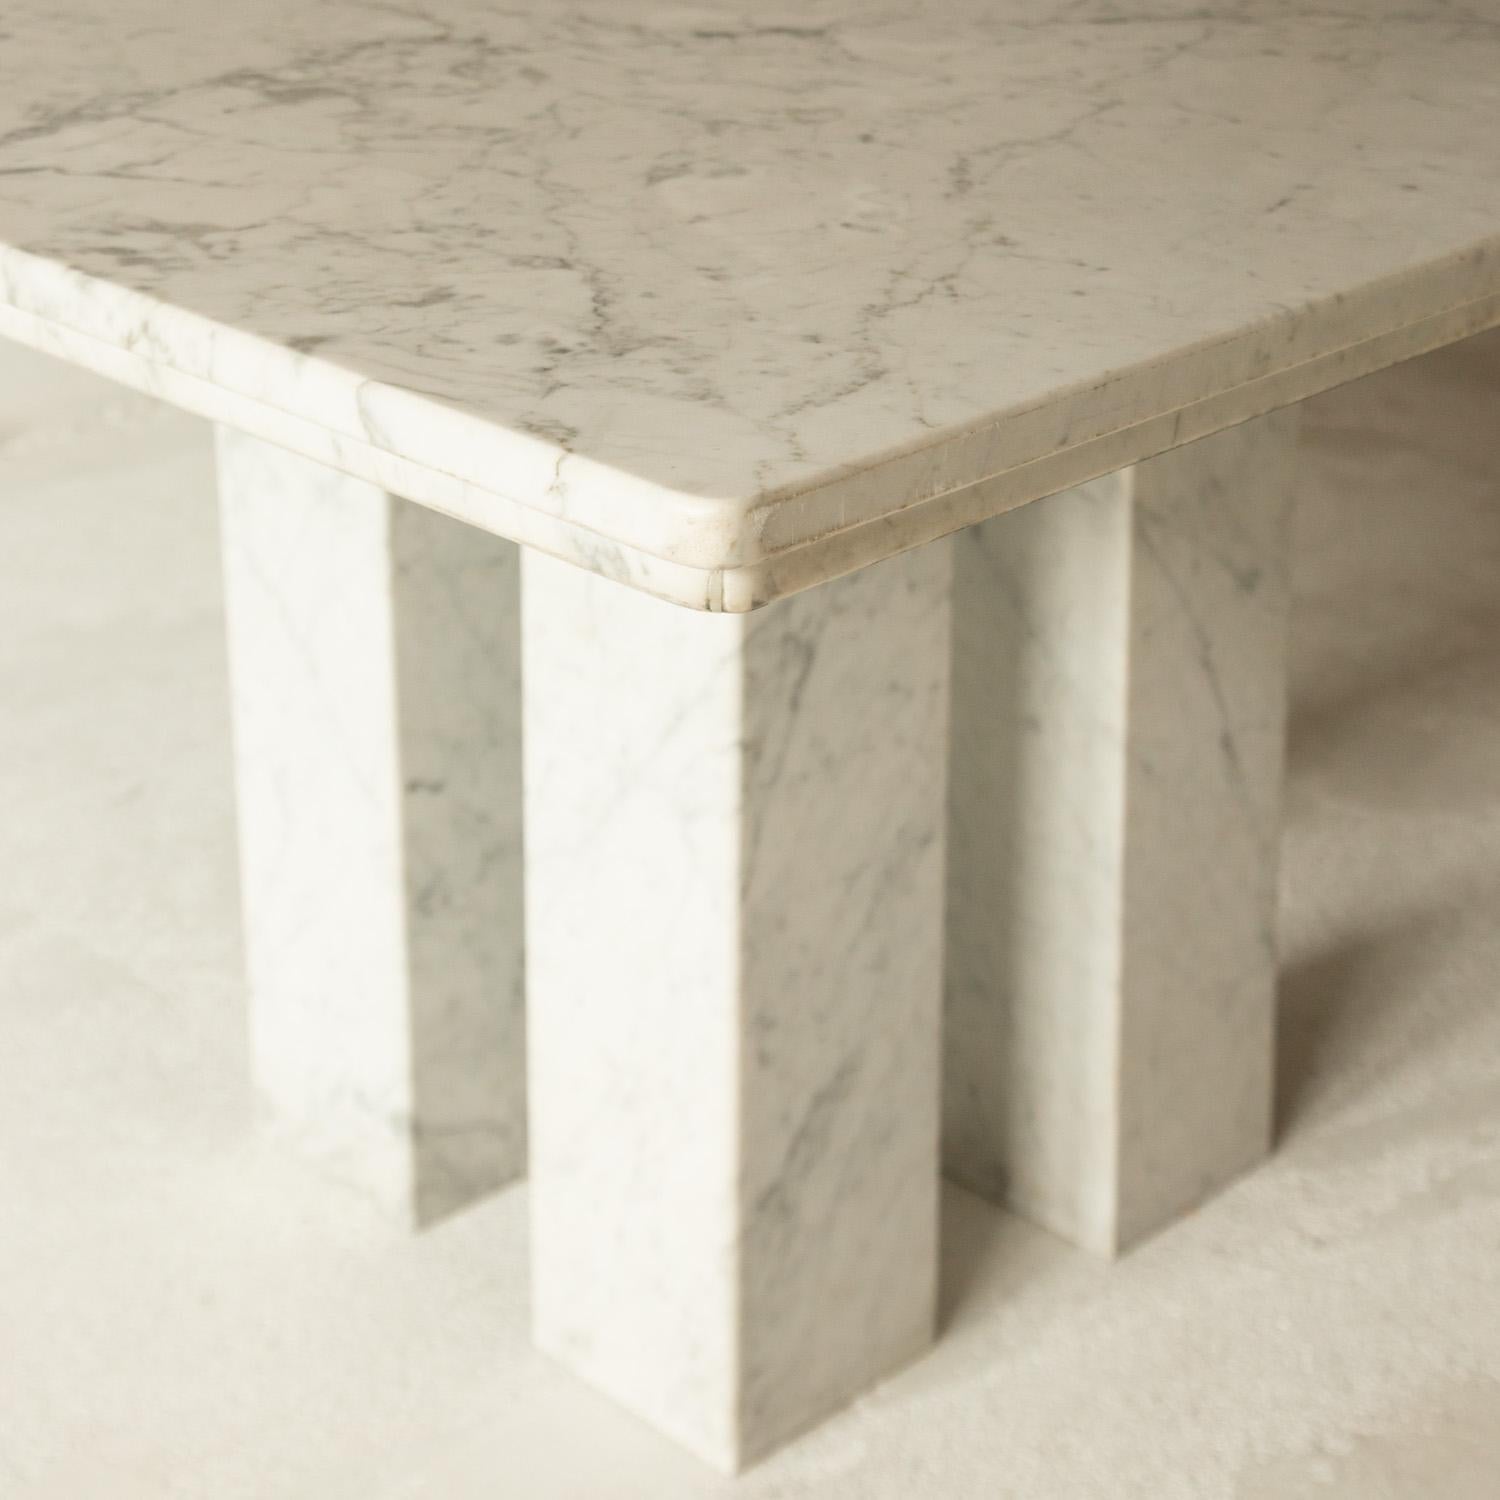 Square Italian Dining Table in Carrara Marble with Four Massive Columns 3